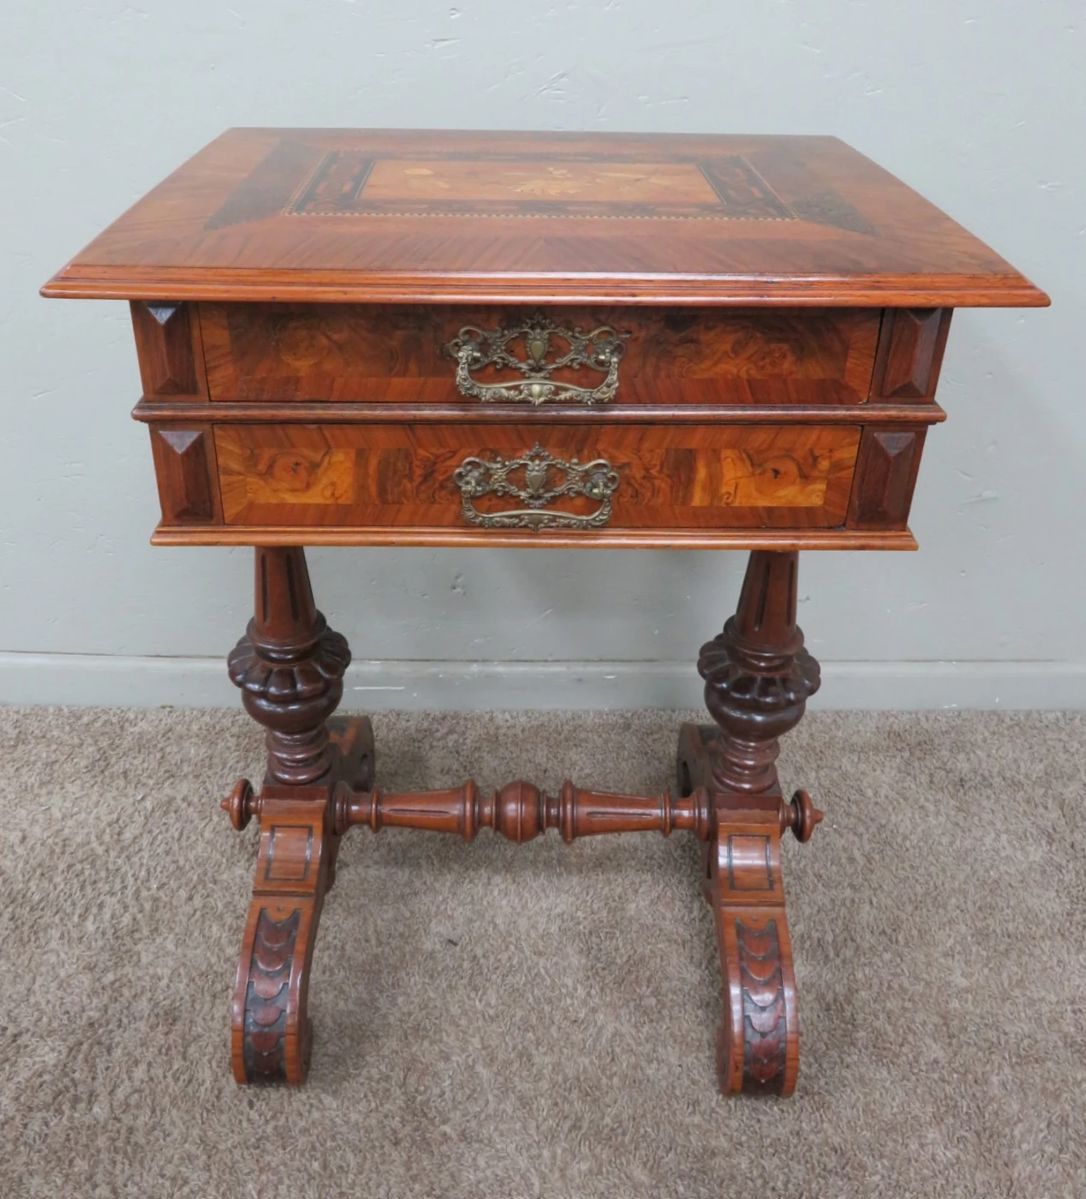 Lovely lift top sewing table